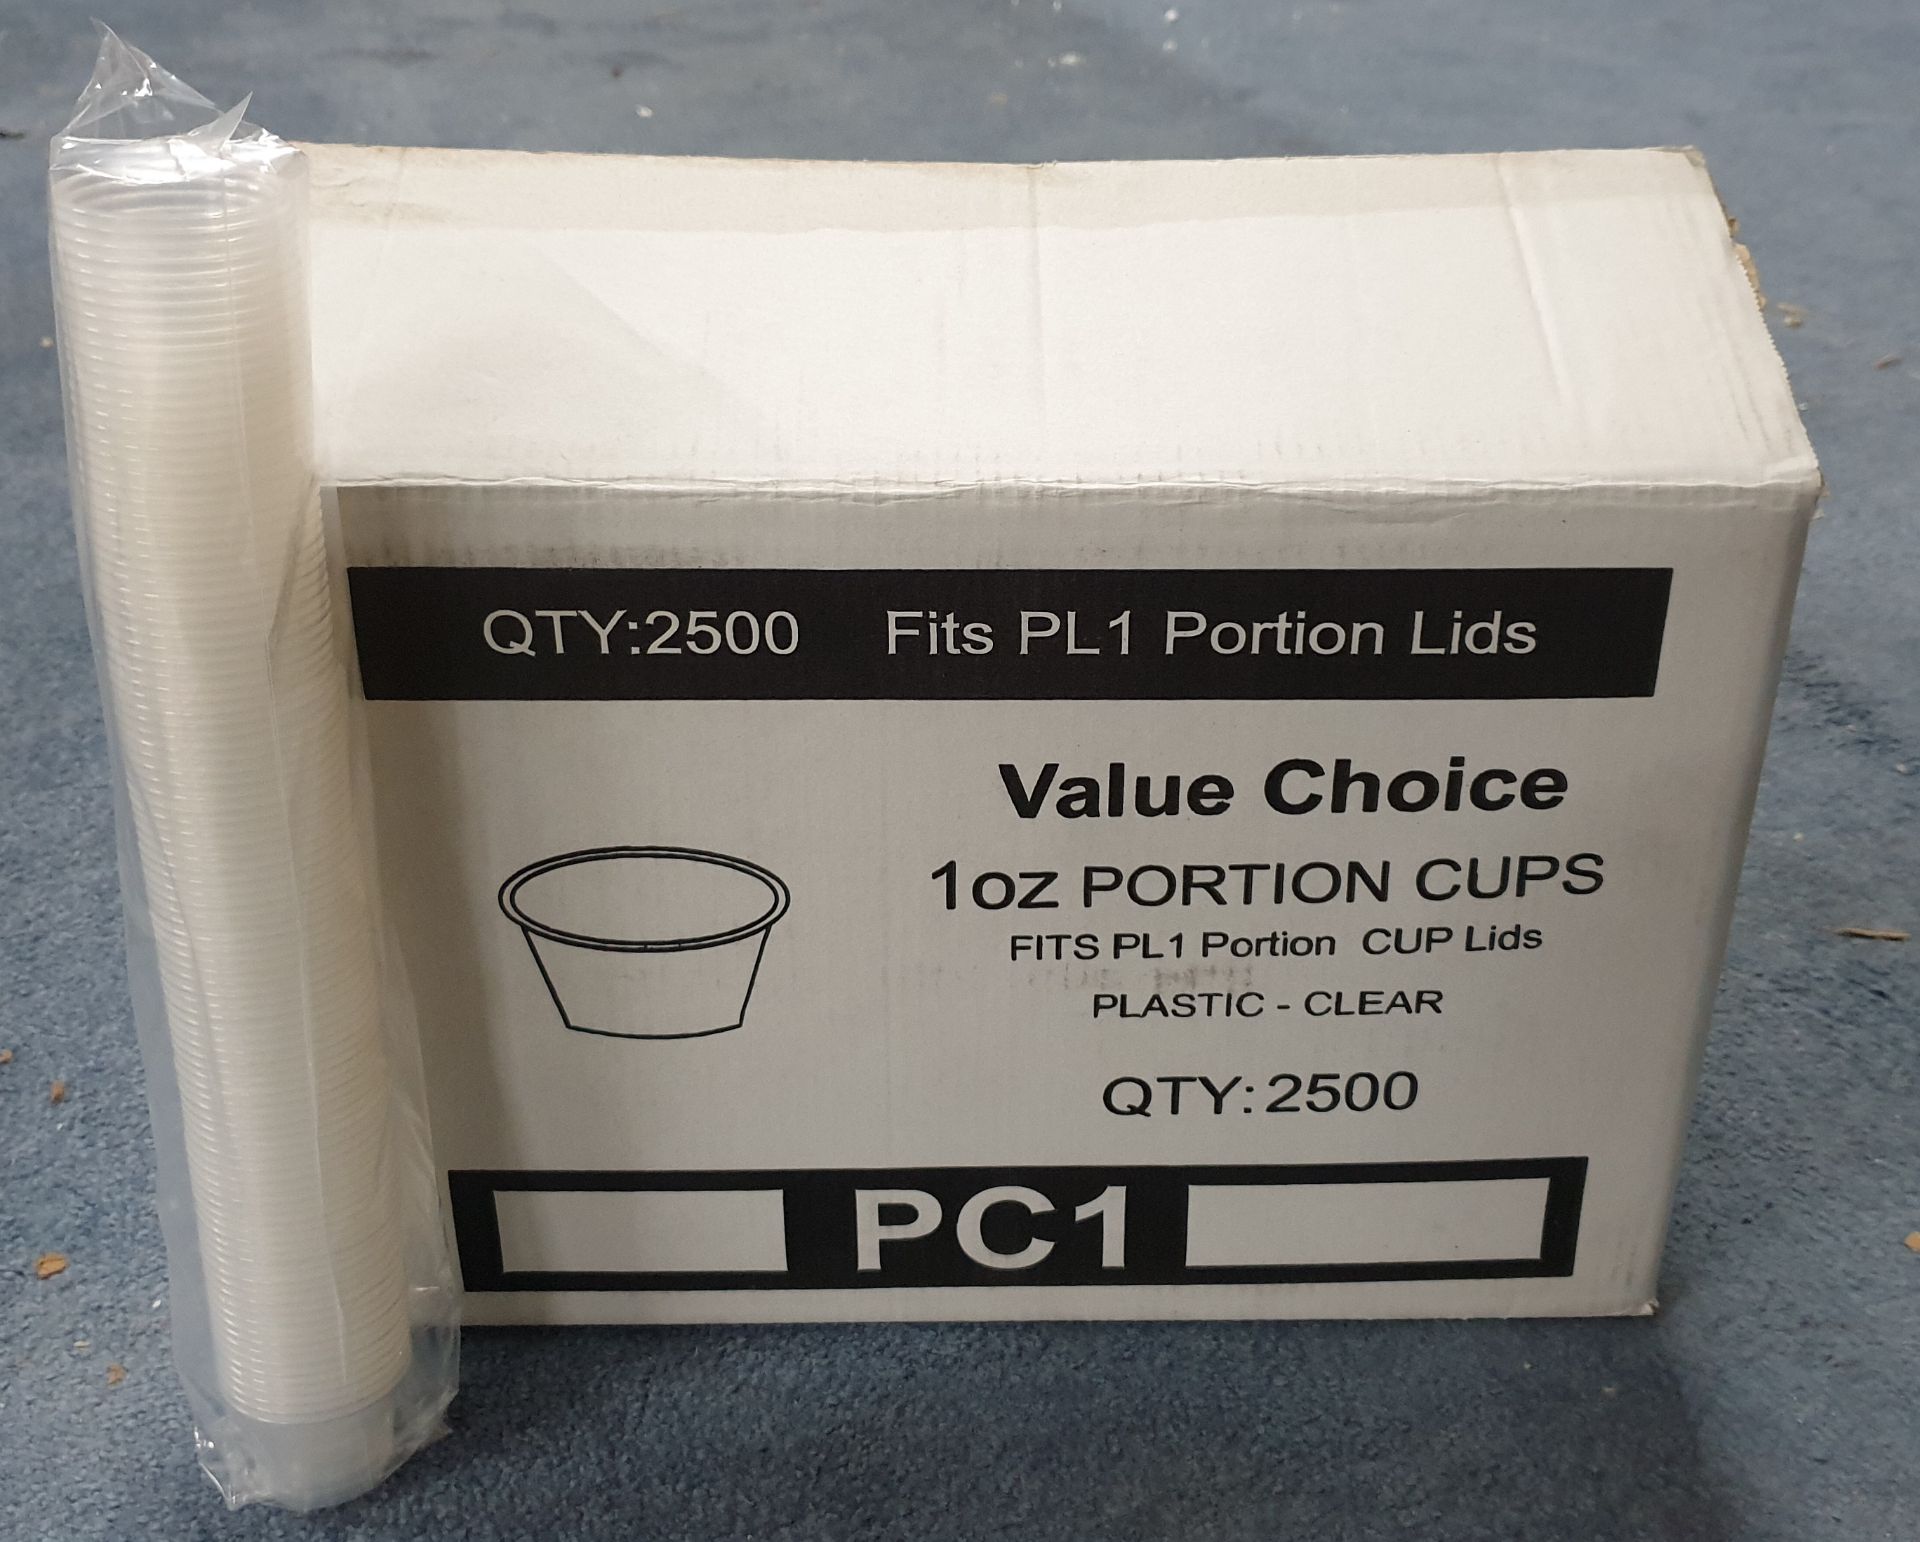 10 x Box of Portion Cups & 10 Box of Lids by Value Choice